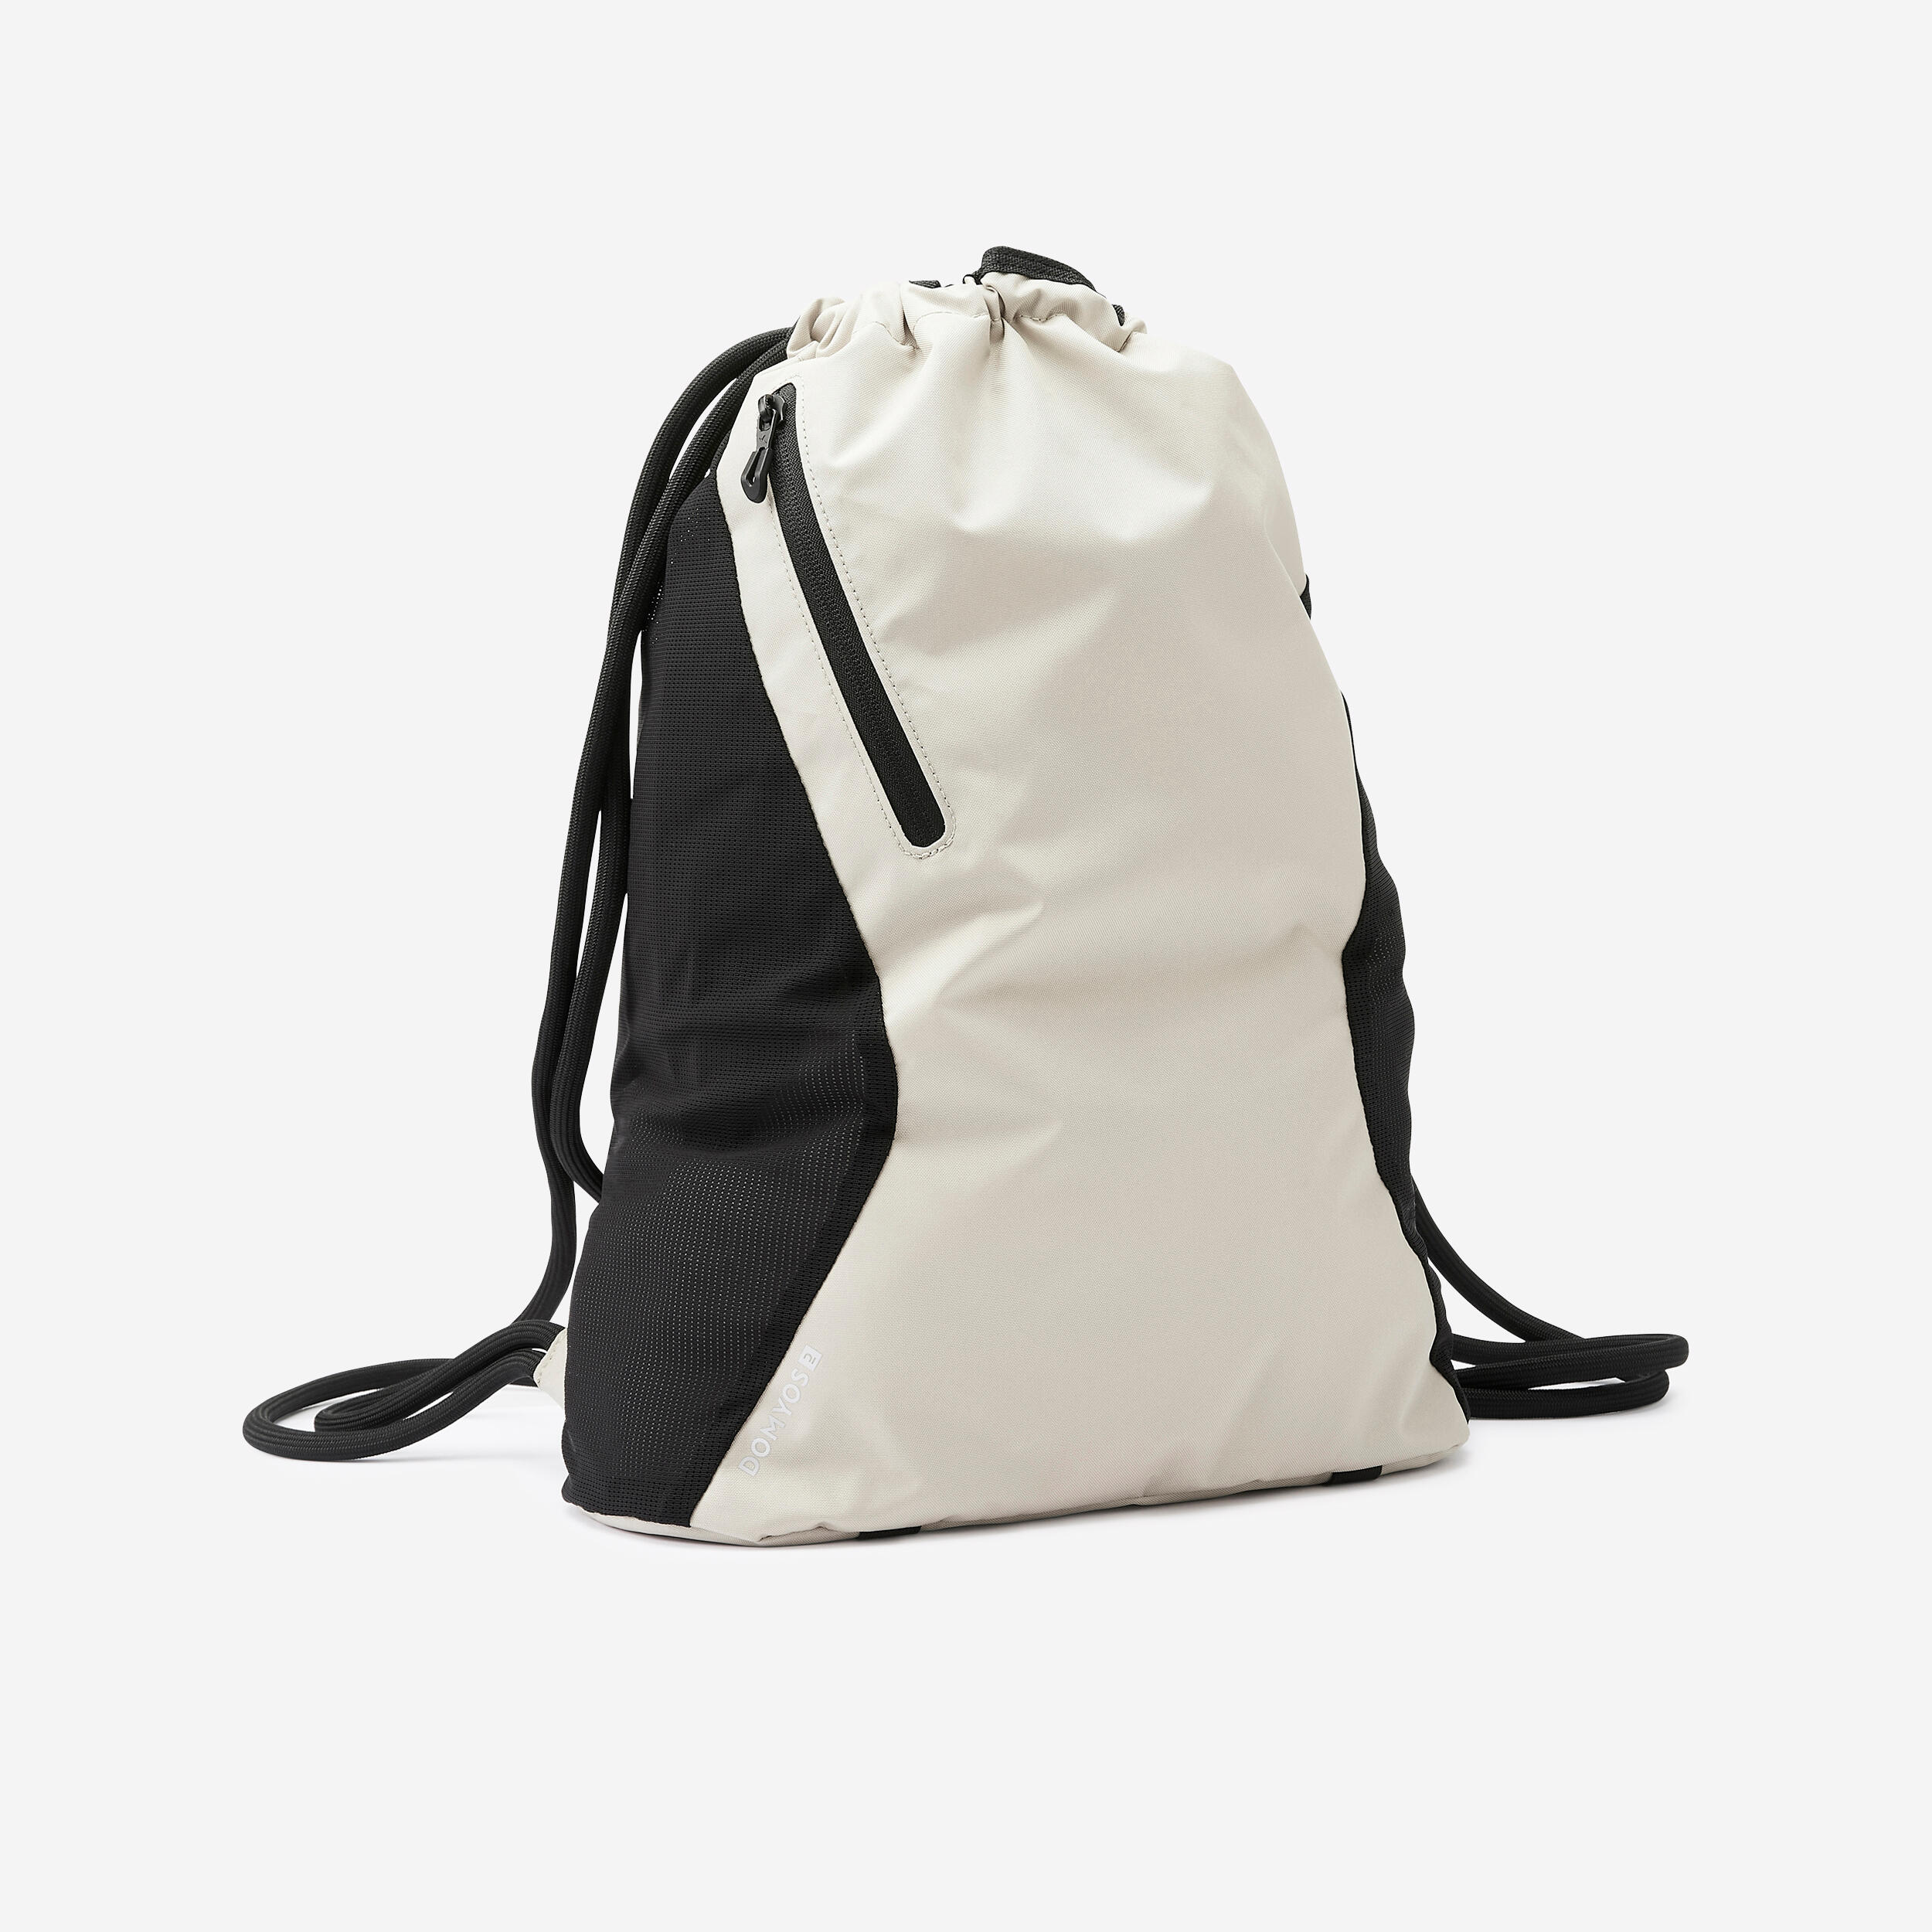 DOMYOS Fitness Backpack 15L - Beige and Black